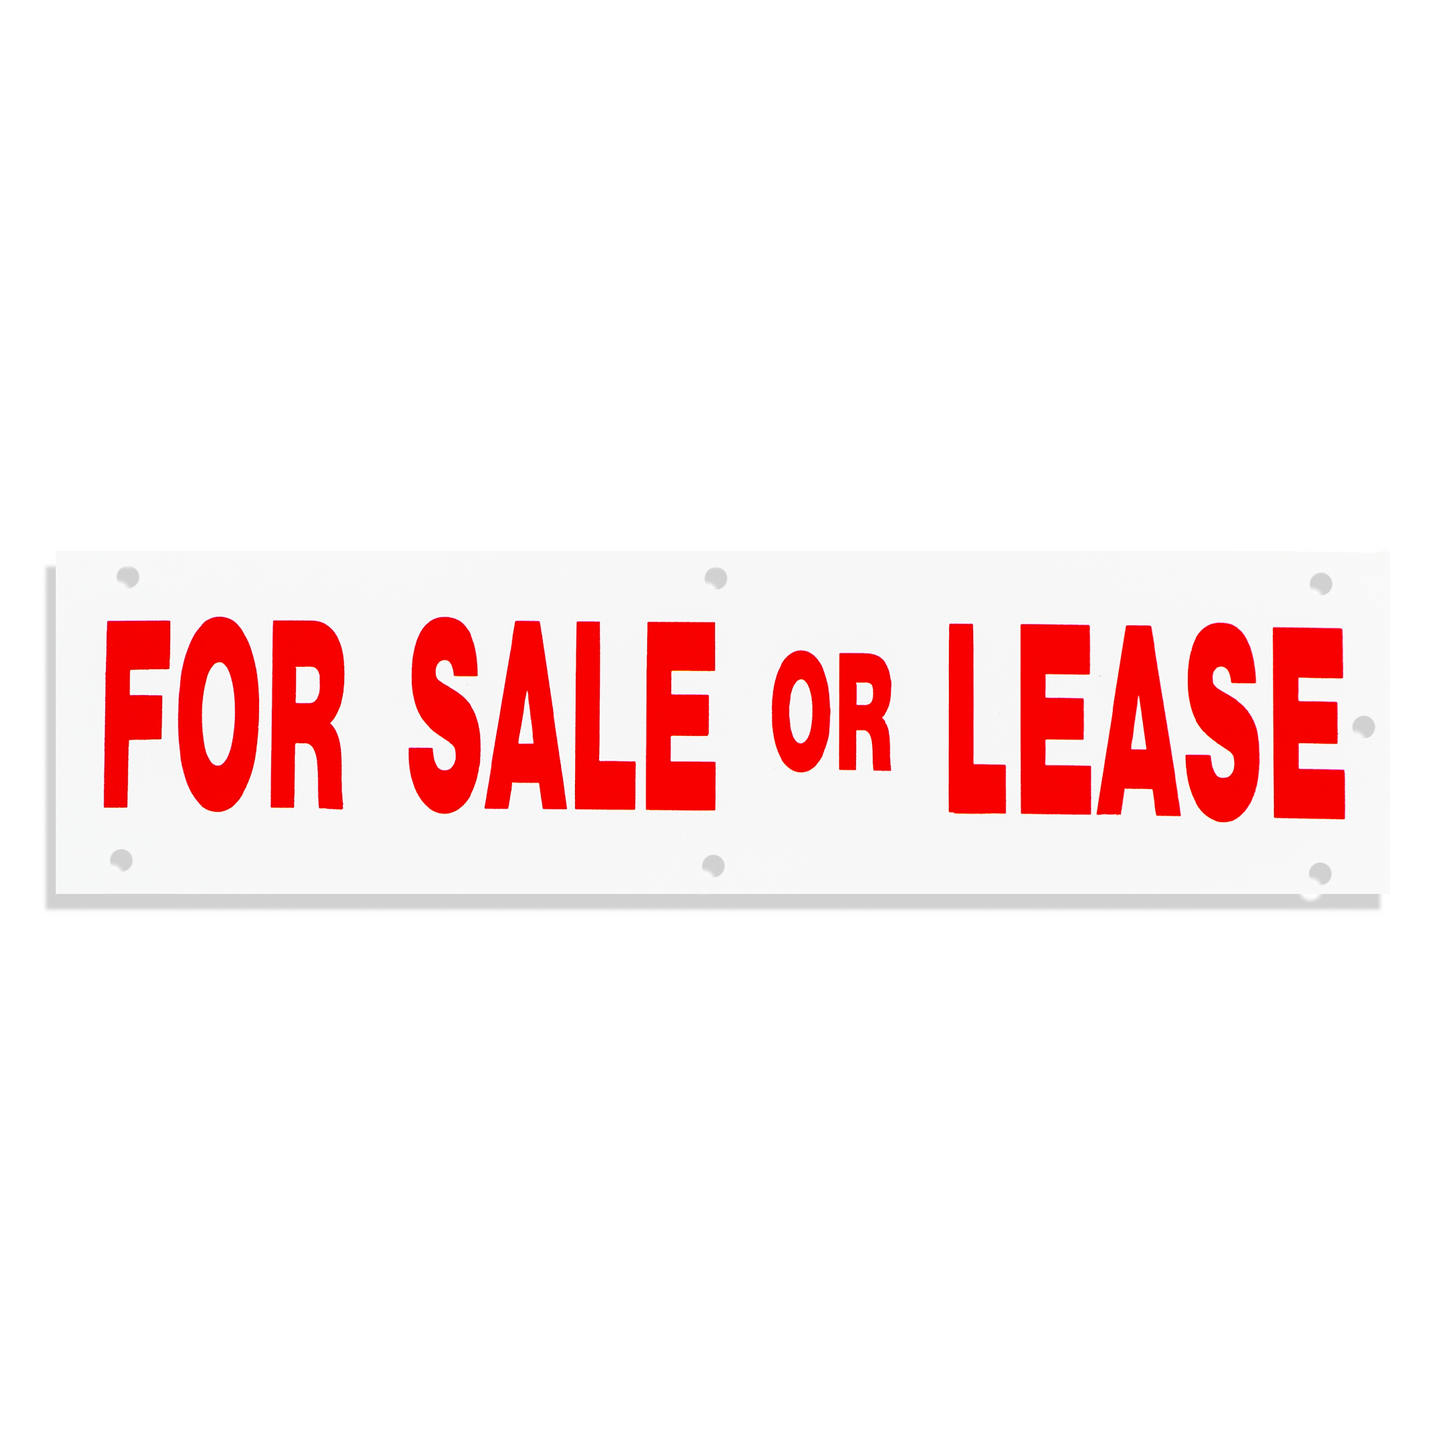 Rider - For Sale or Lease Rider   